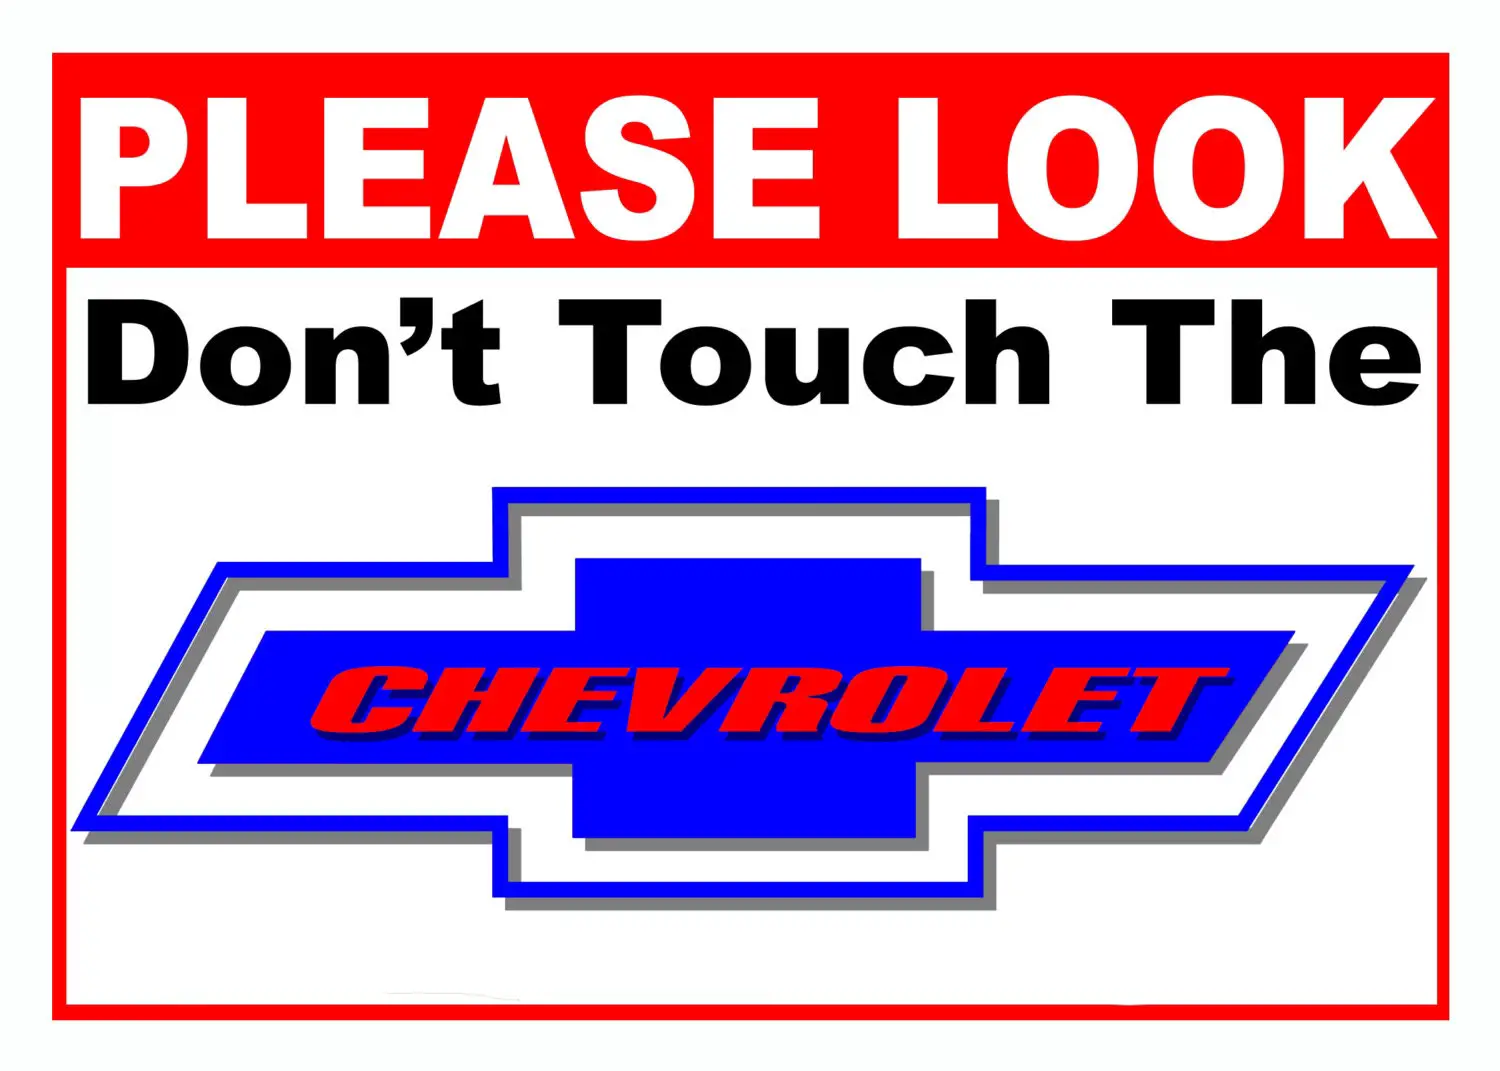 do not touch car show signs
